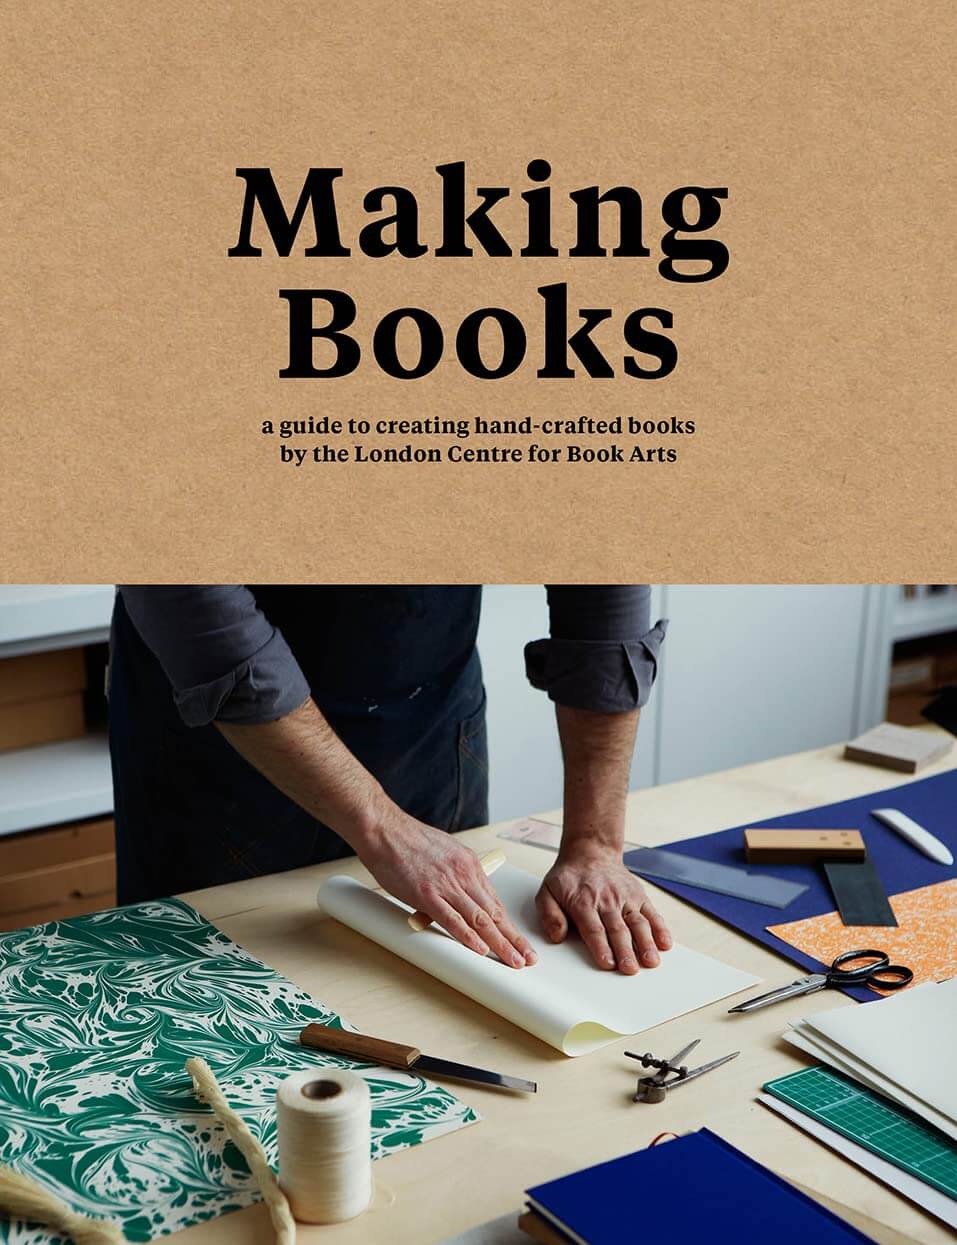 Making Books: A guide to creating hand-crafted books (9781911216209)